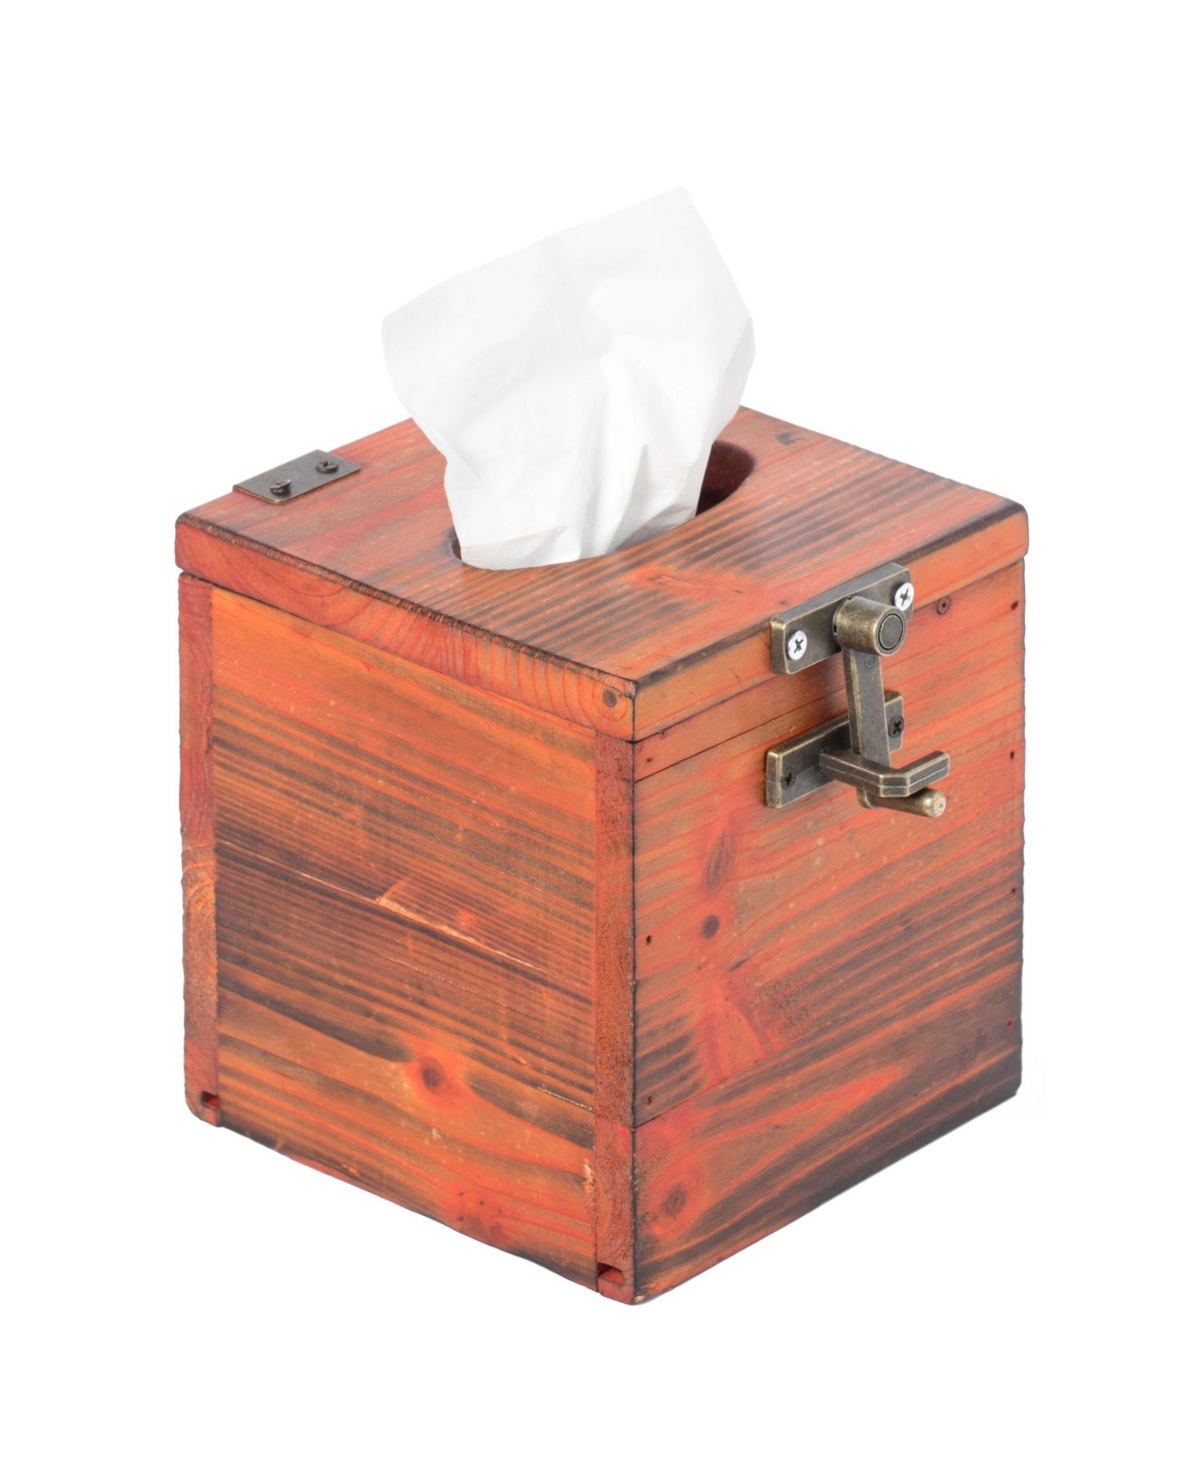 Square Wooden Rustic Lockable Tissue Box Cover Holder - Brown